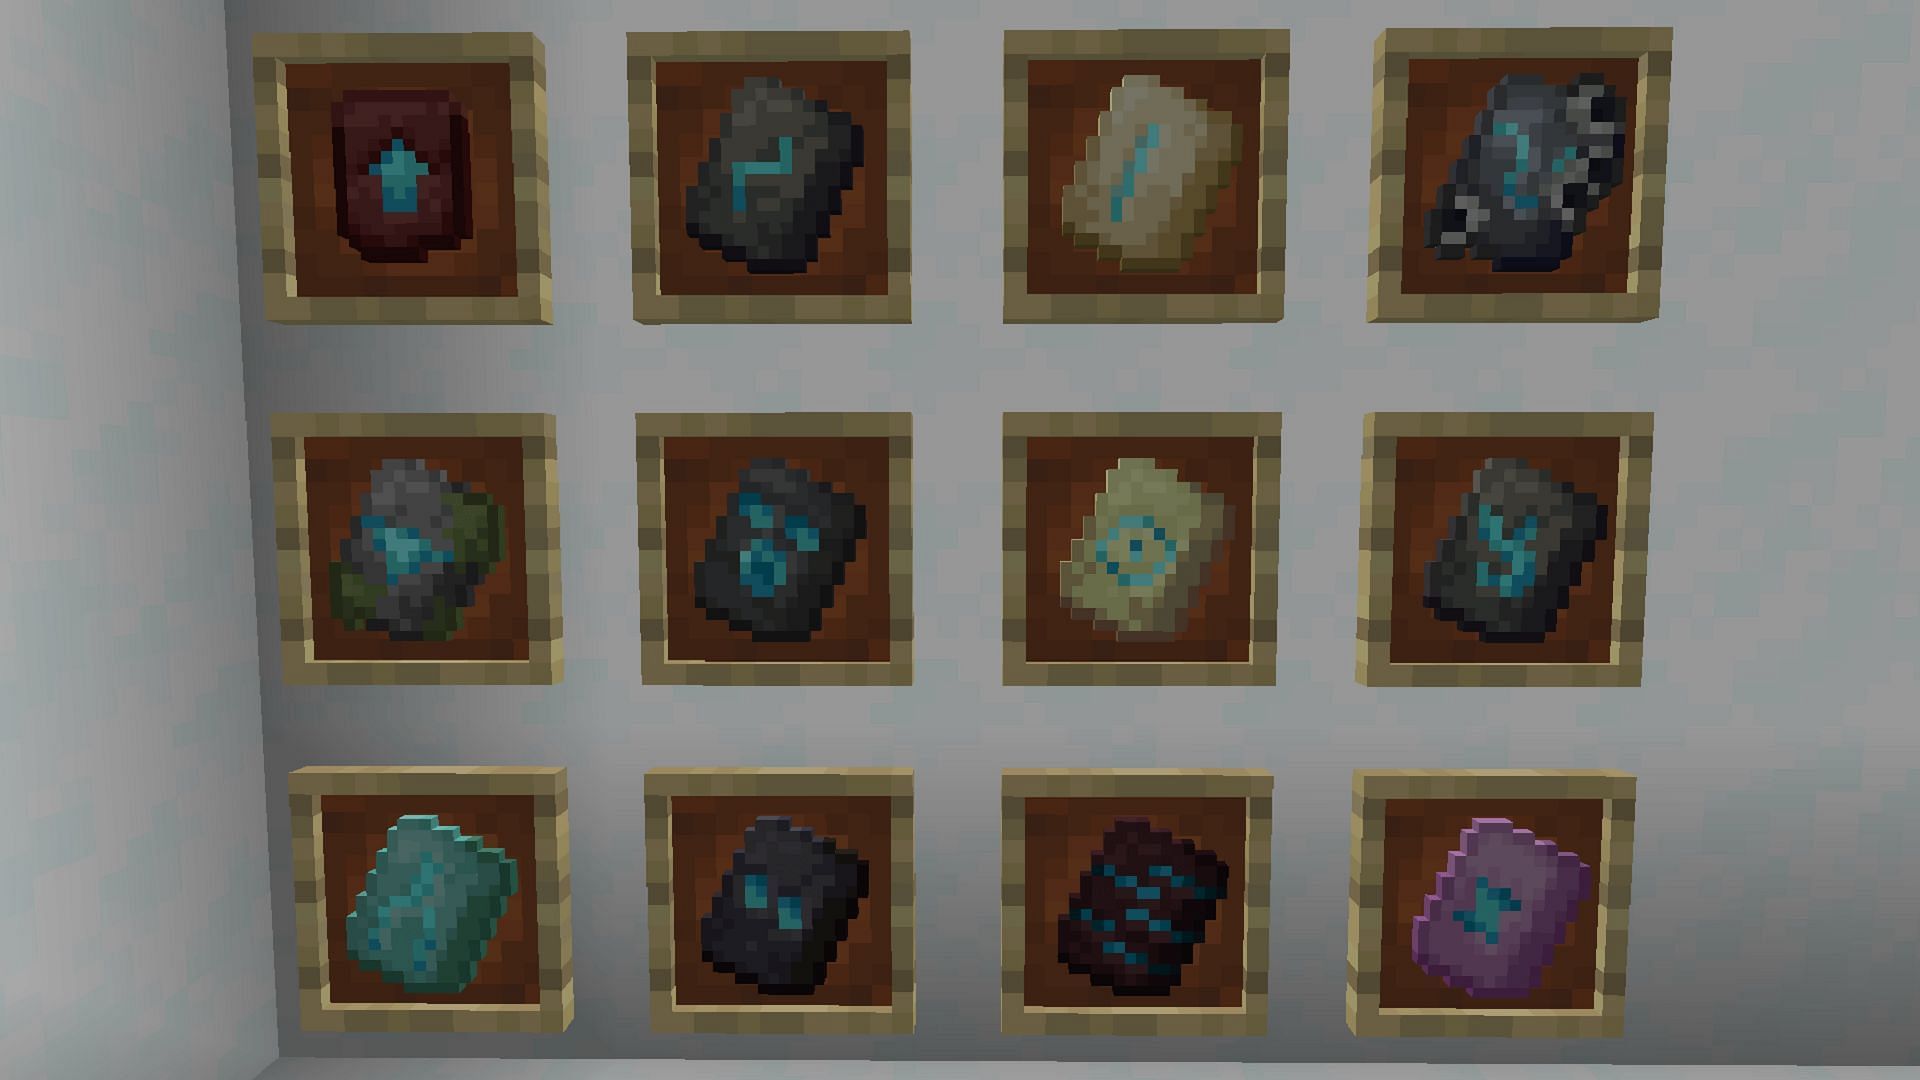 New lootable items allow Minecraft players to customize their armor and upgrade their gear (Image via Mojang)